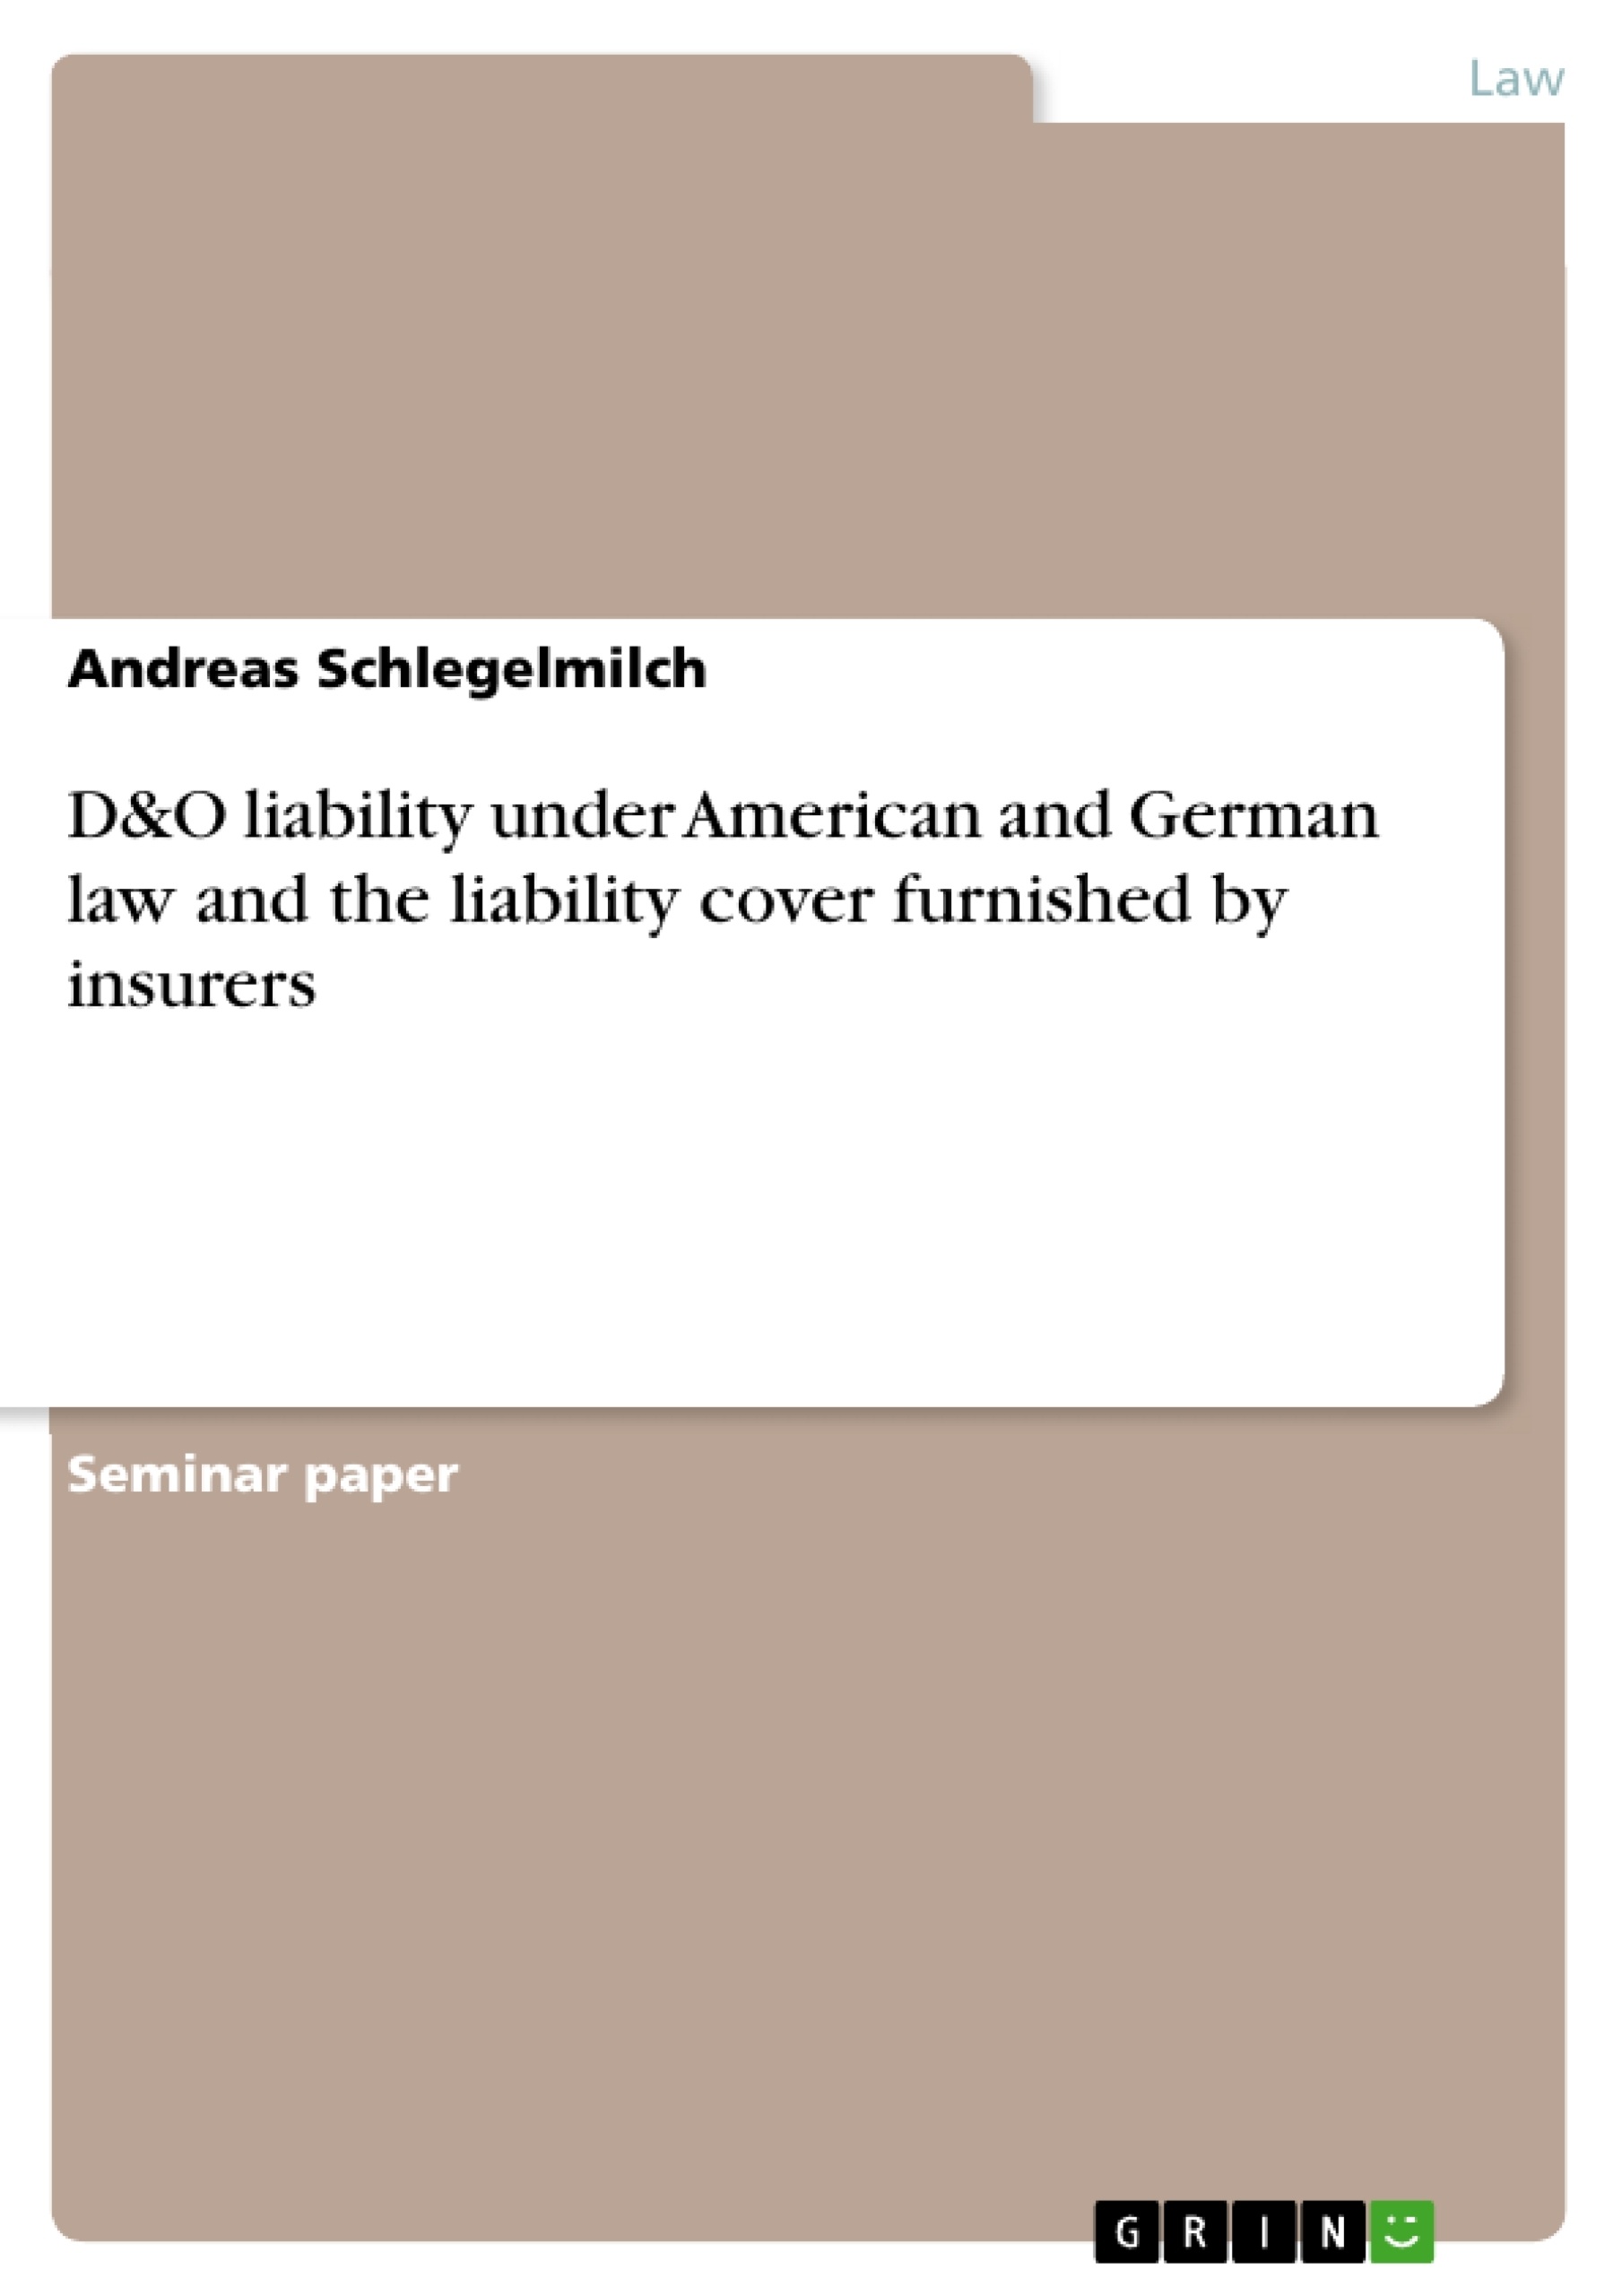 Título: D&O liability under American and German law and the liability cover furnished by insurers